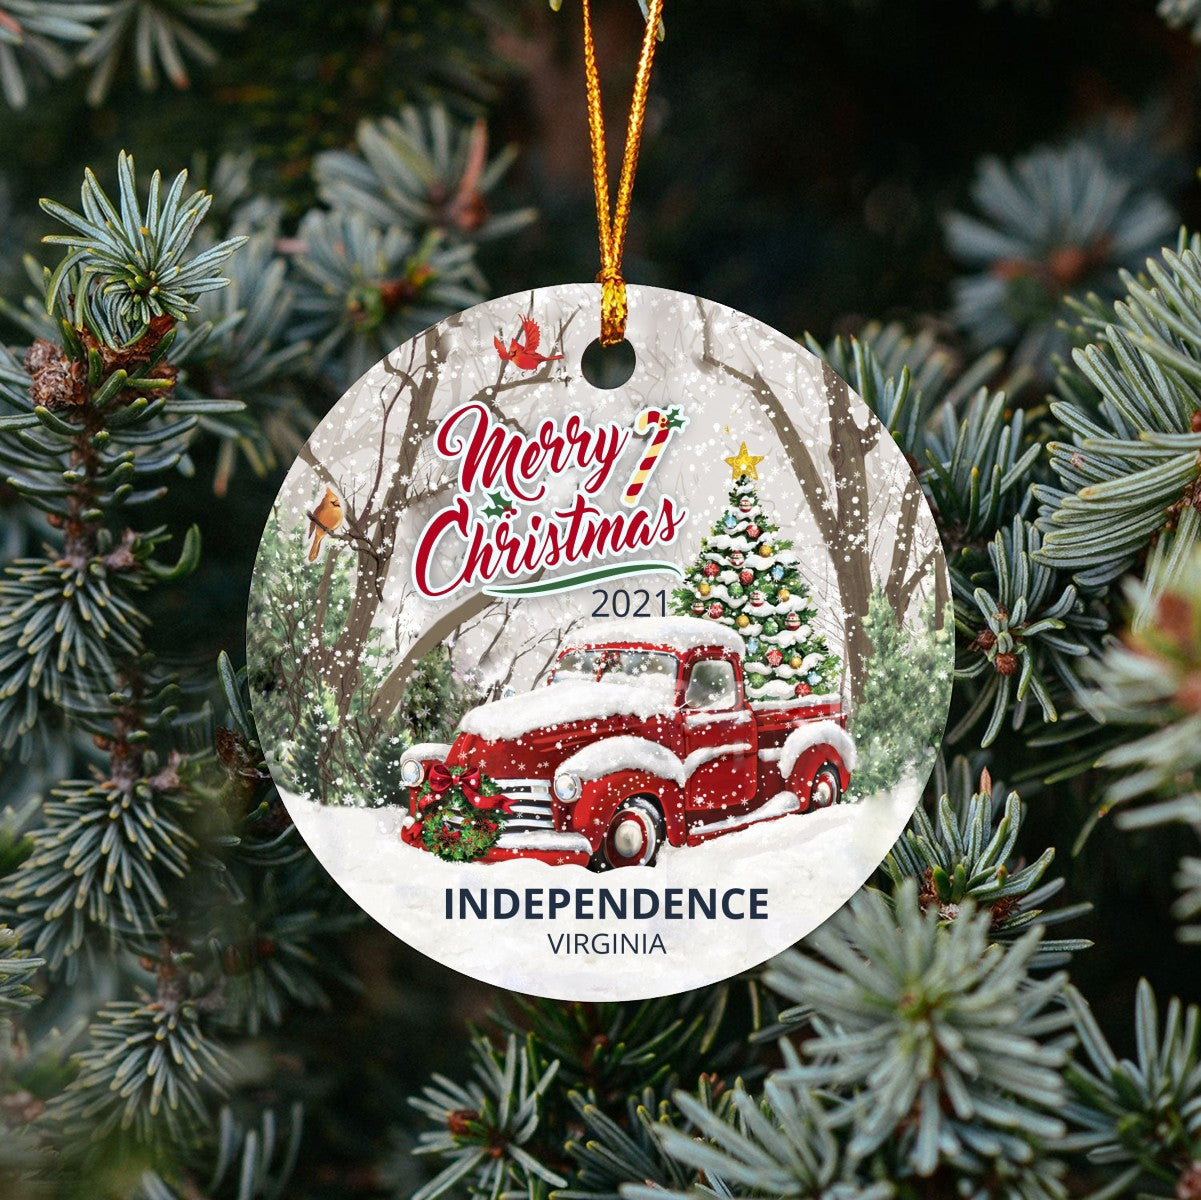 Christmas Tree Ornaments Independence - Ornament With Name City, State Independence Virginia VA Ornament - Red Truck Xmas Ornaments 3'' Plastic Gift For Family, Friend And Housewarming